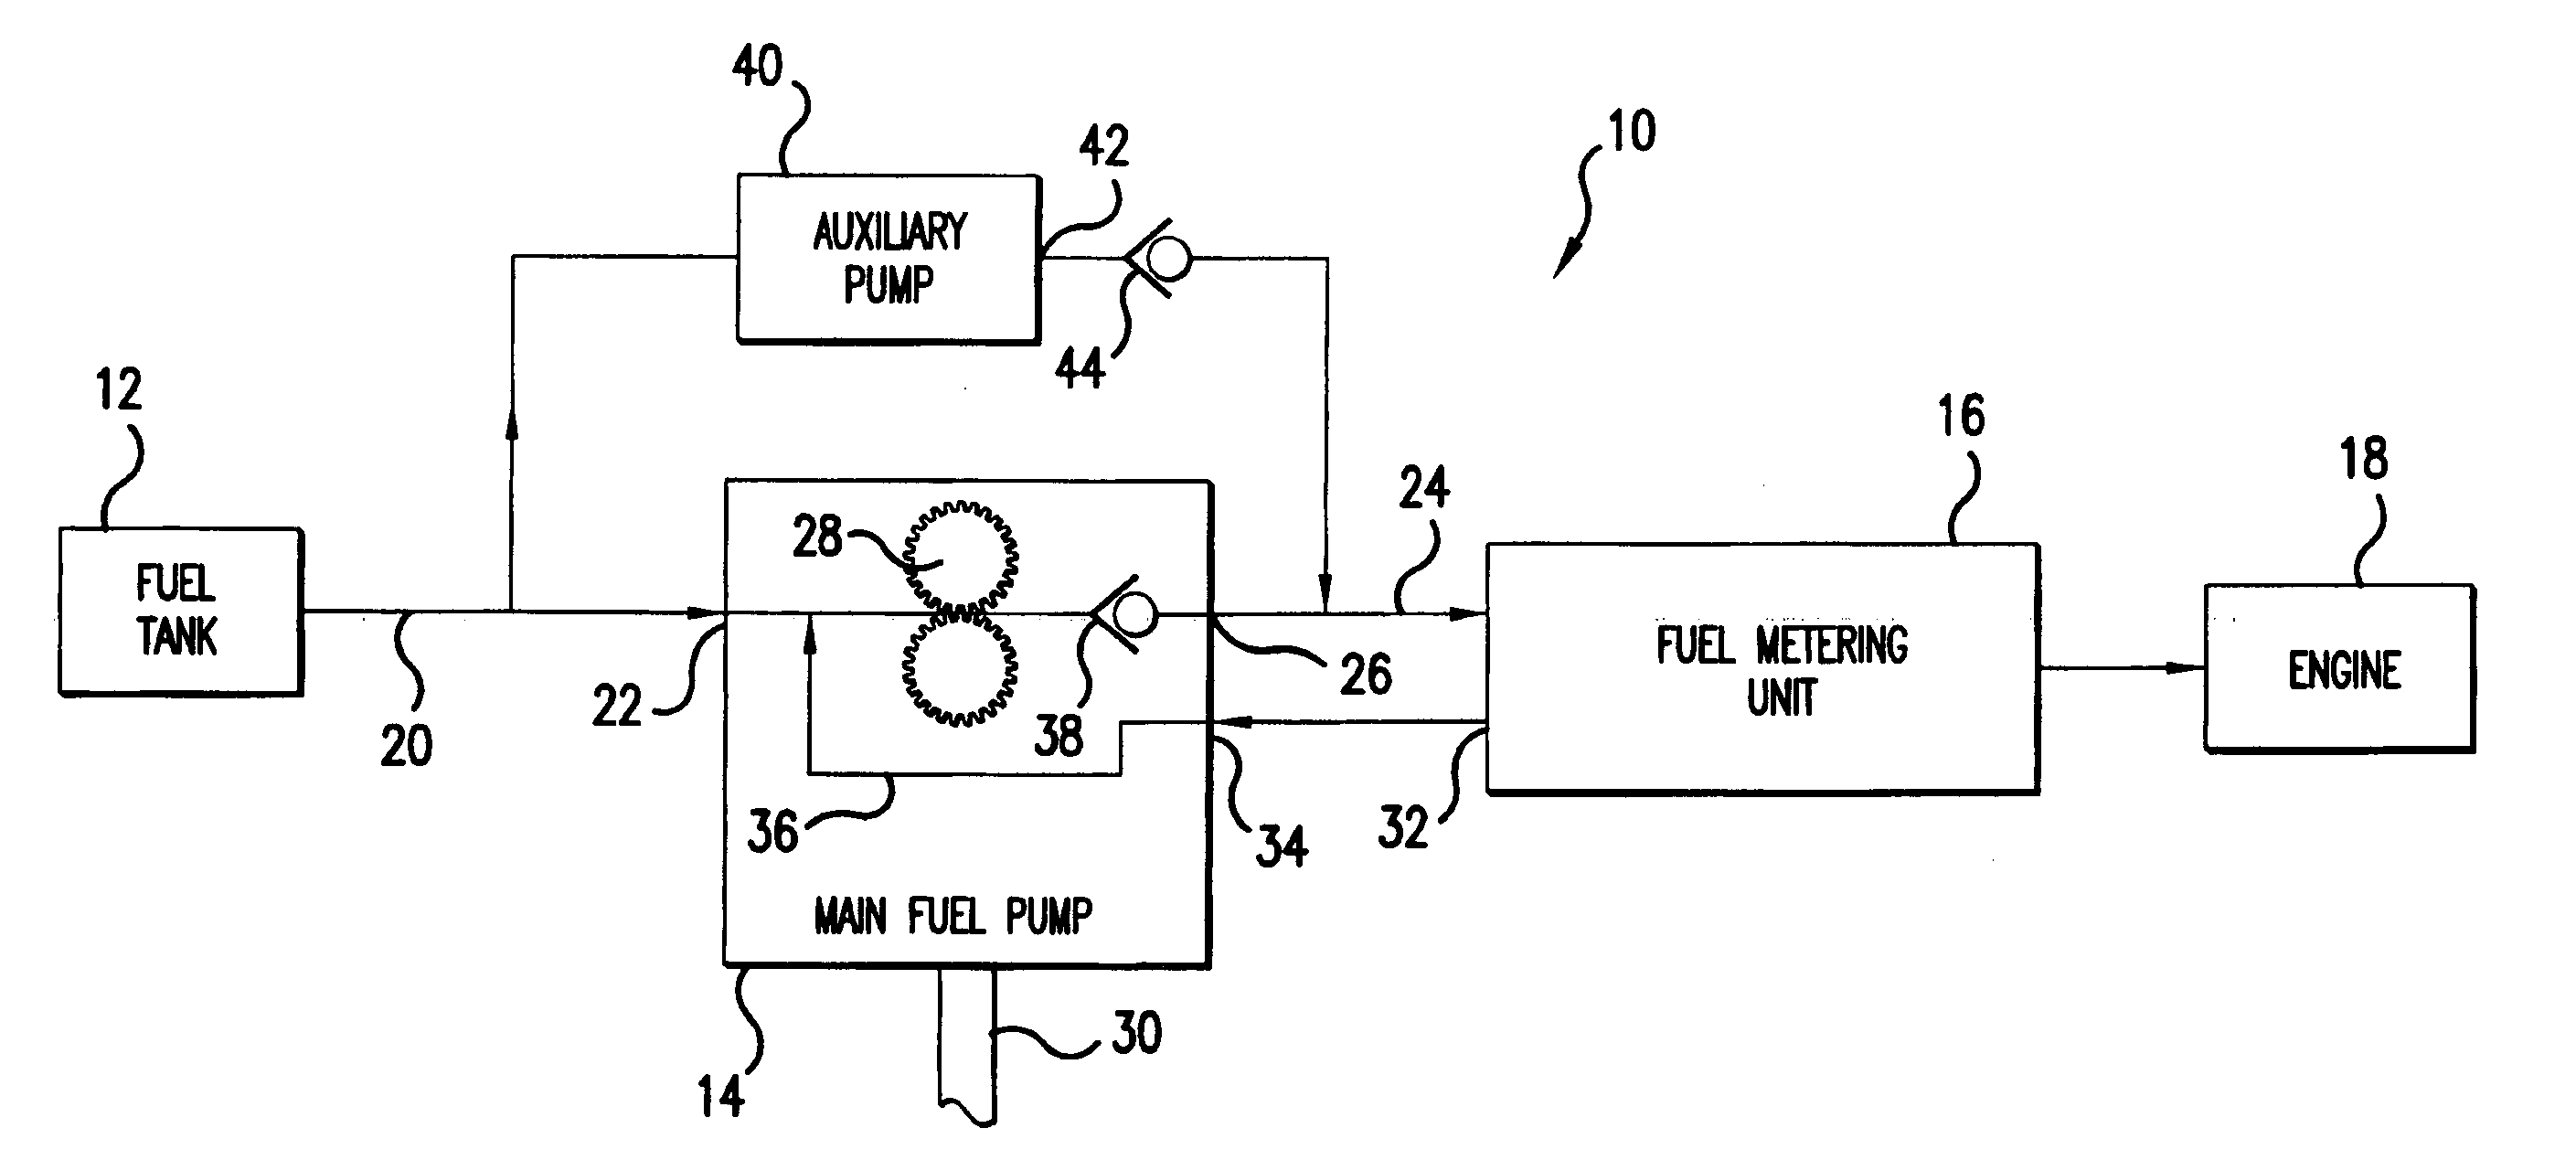 Reduced-weight fuel system for gas turbine engine, gas turbine engine having a reduced-weight fuel system, and method of providing fuel to a gas turbine engine using a reduced-weight fuel system